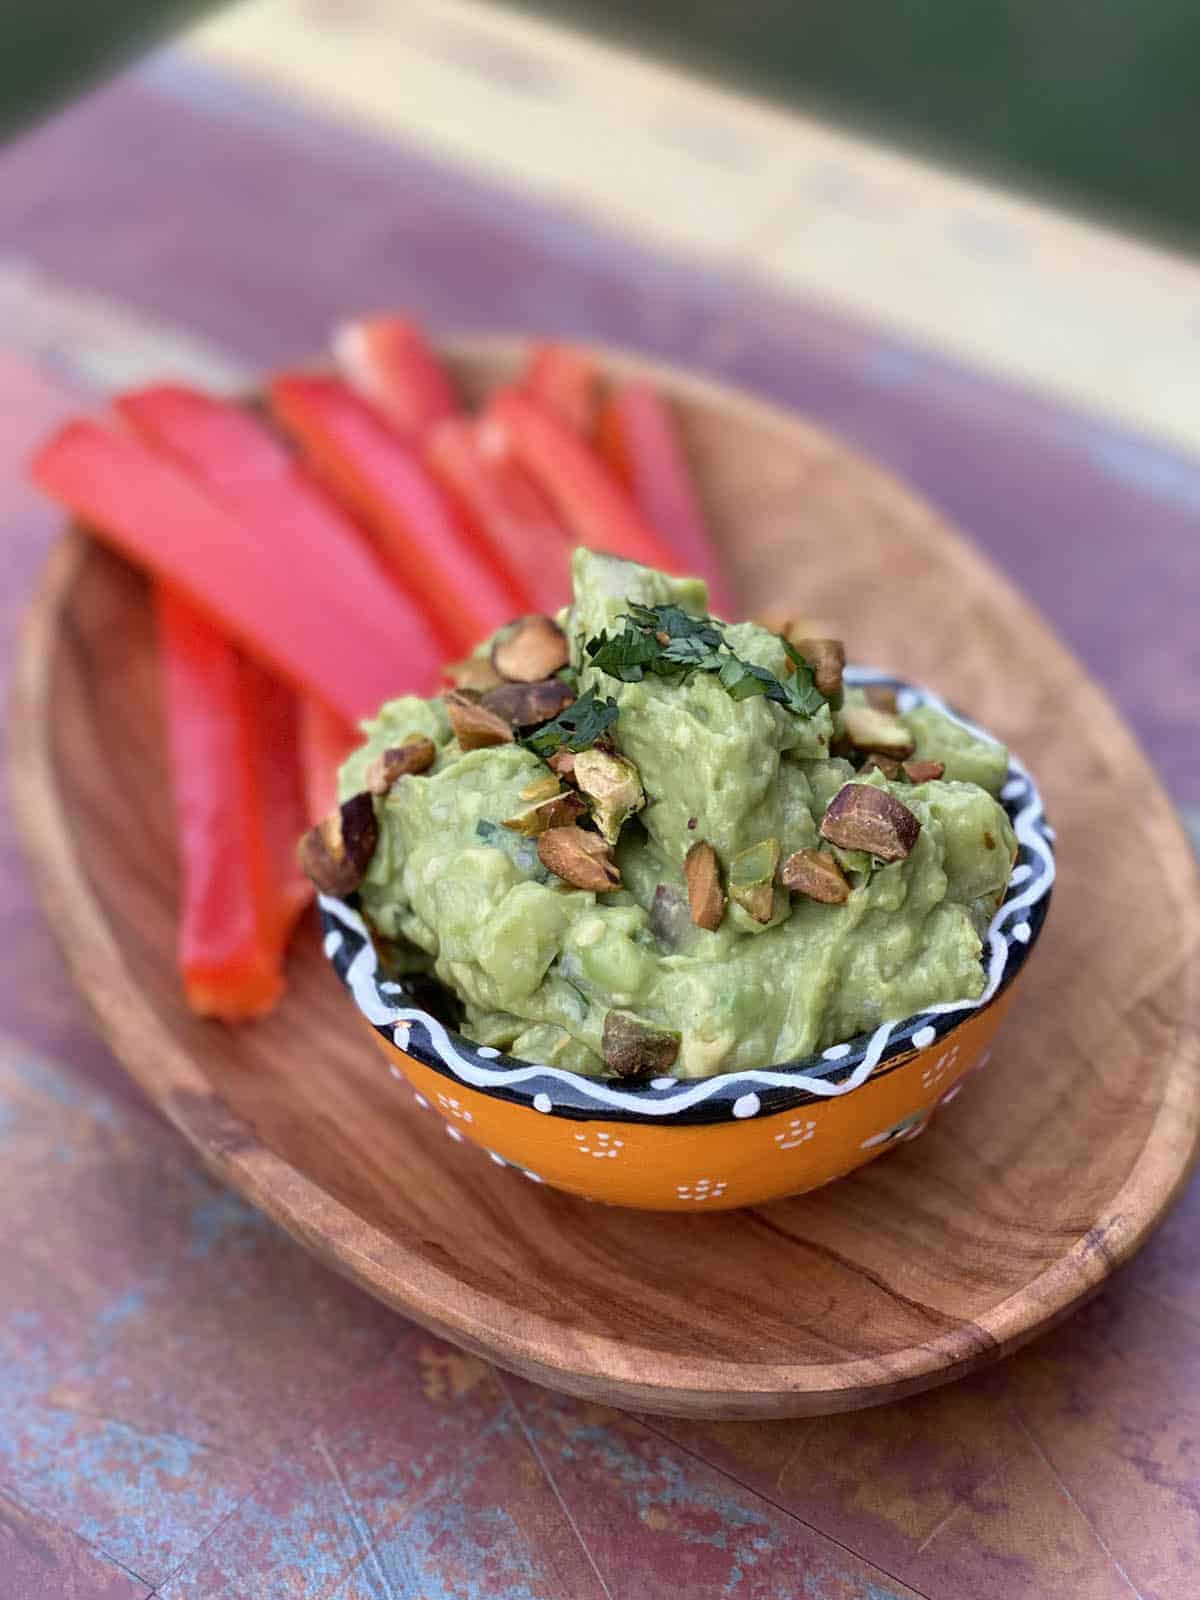 Pear Guacamole with Pistachios in a ramekin on a wooden serving tray with sliced red bell peppers